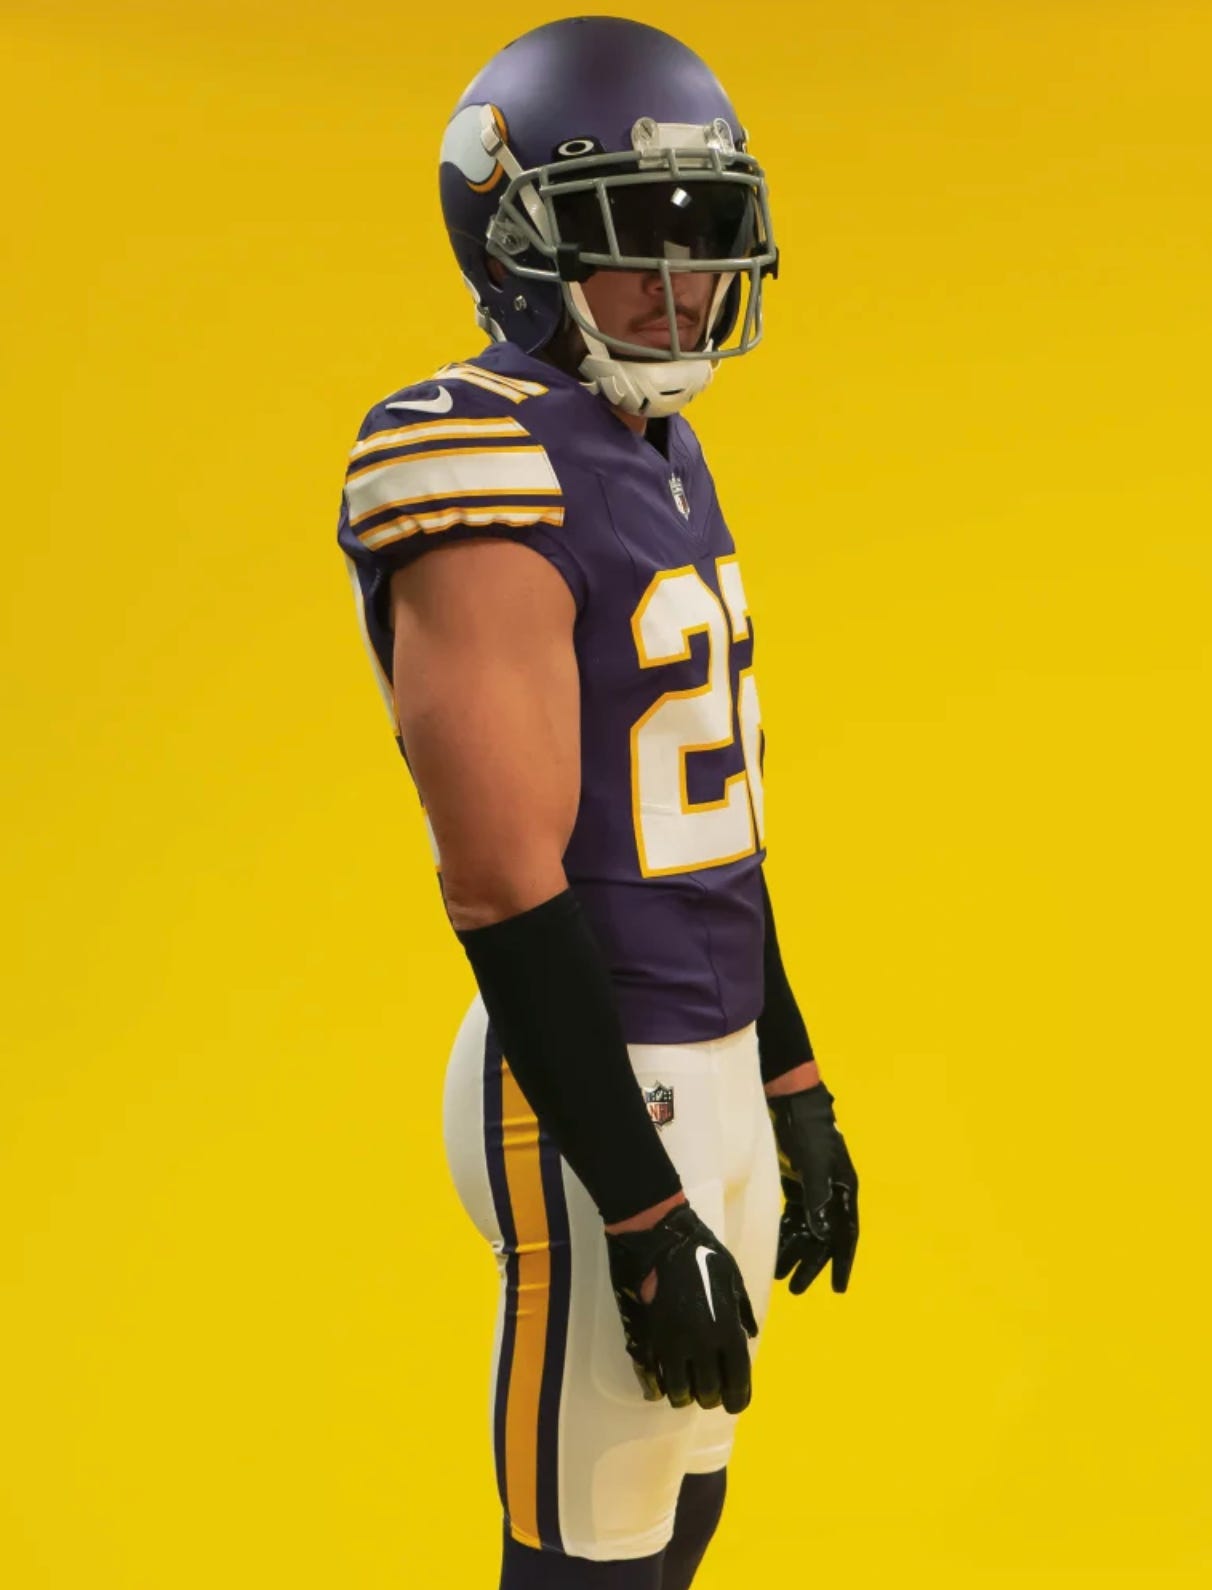 Uni Watch Power Rankings for the NFL's New Throwback and Alternate